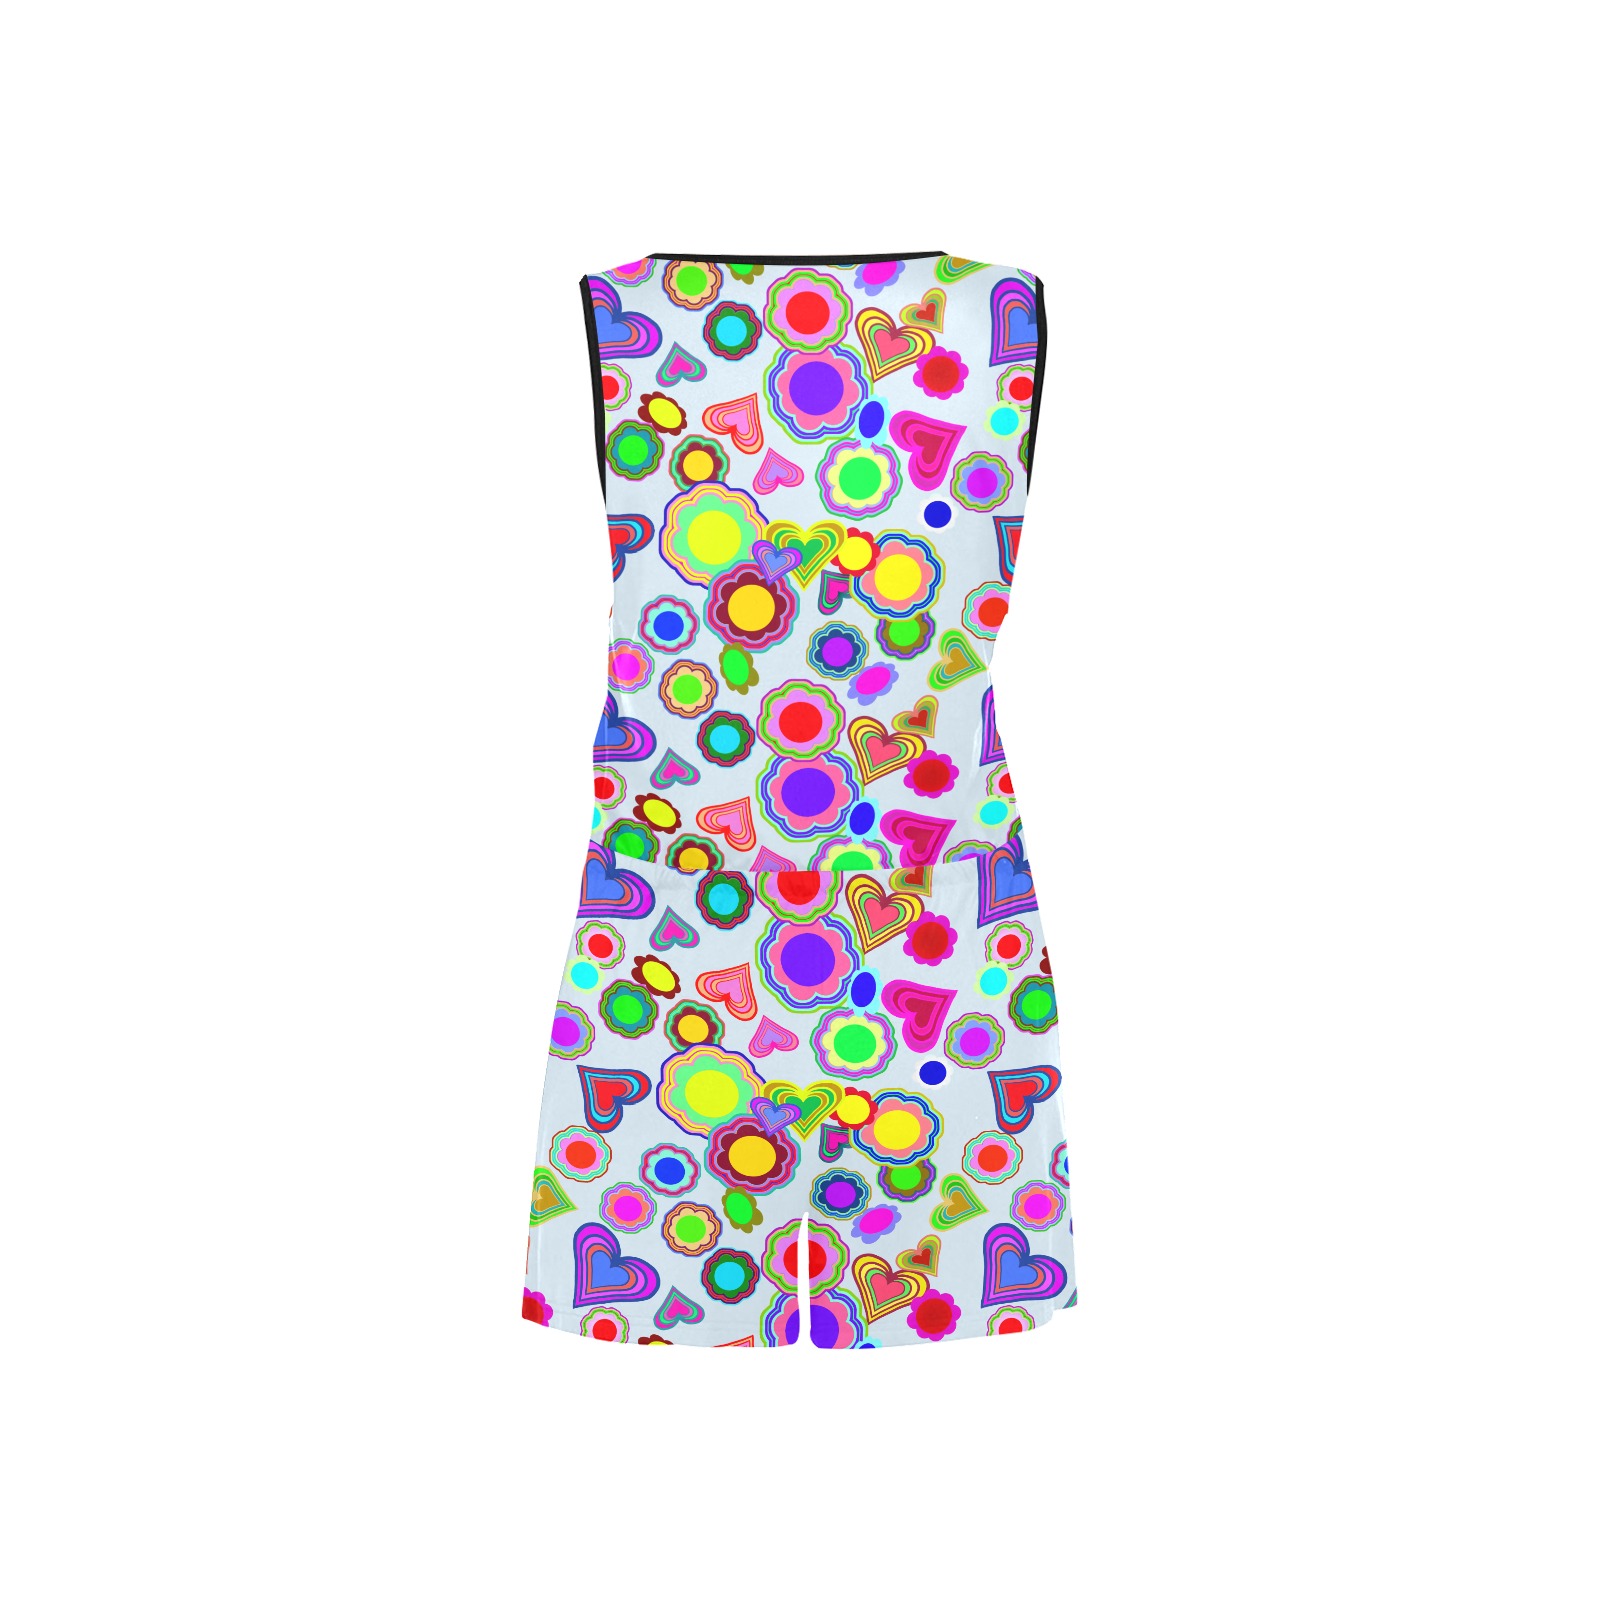 Groovy Hearts and Flowers Blue All Over Print Short Jumpsuit